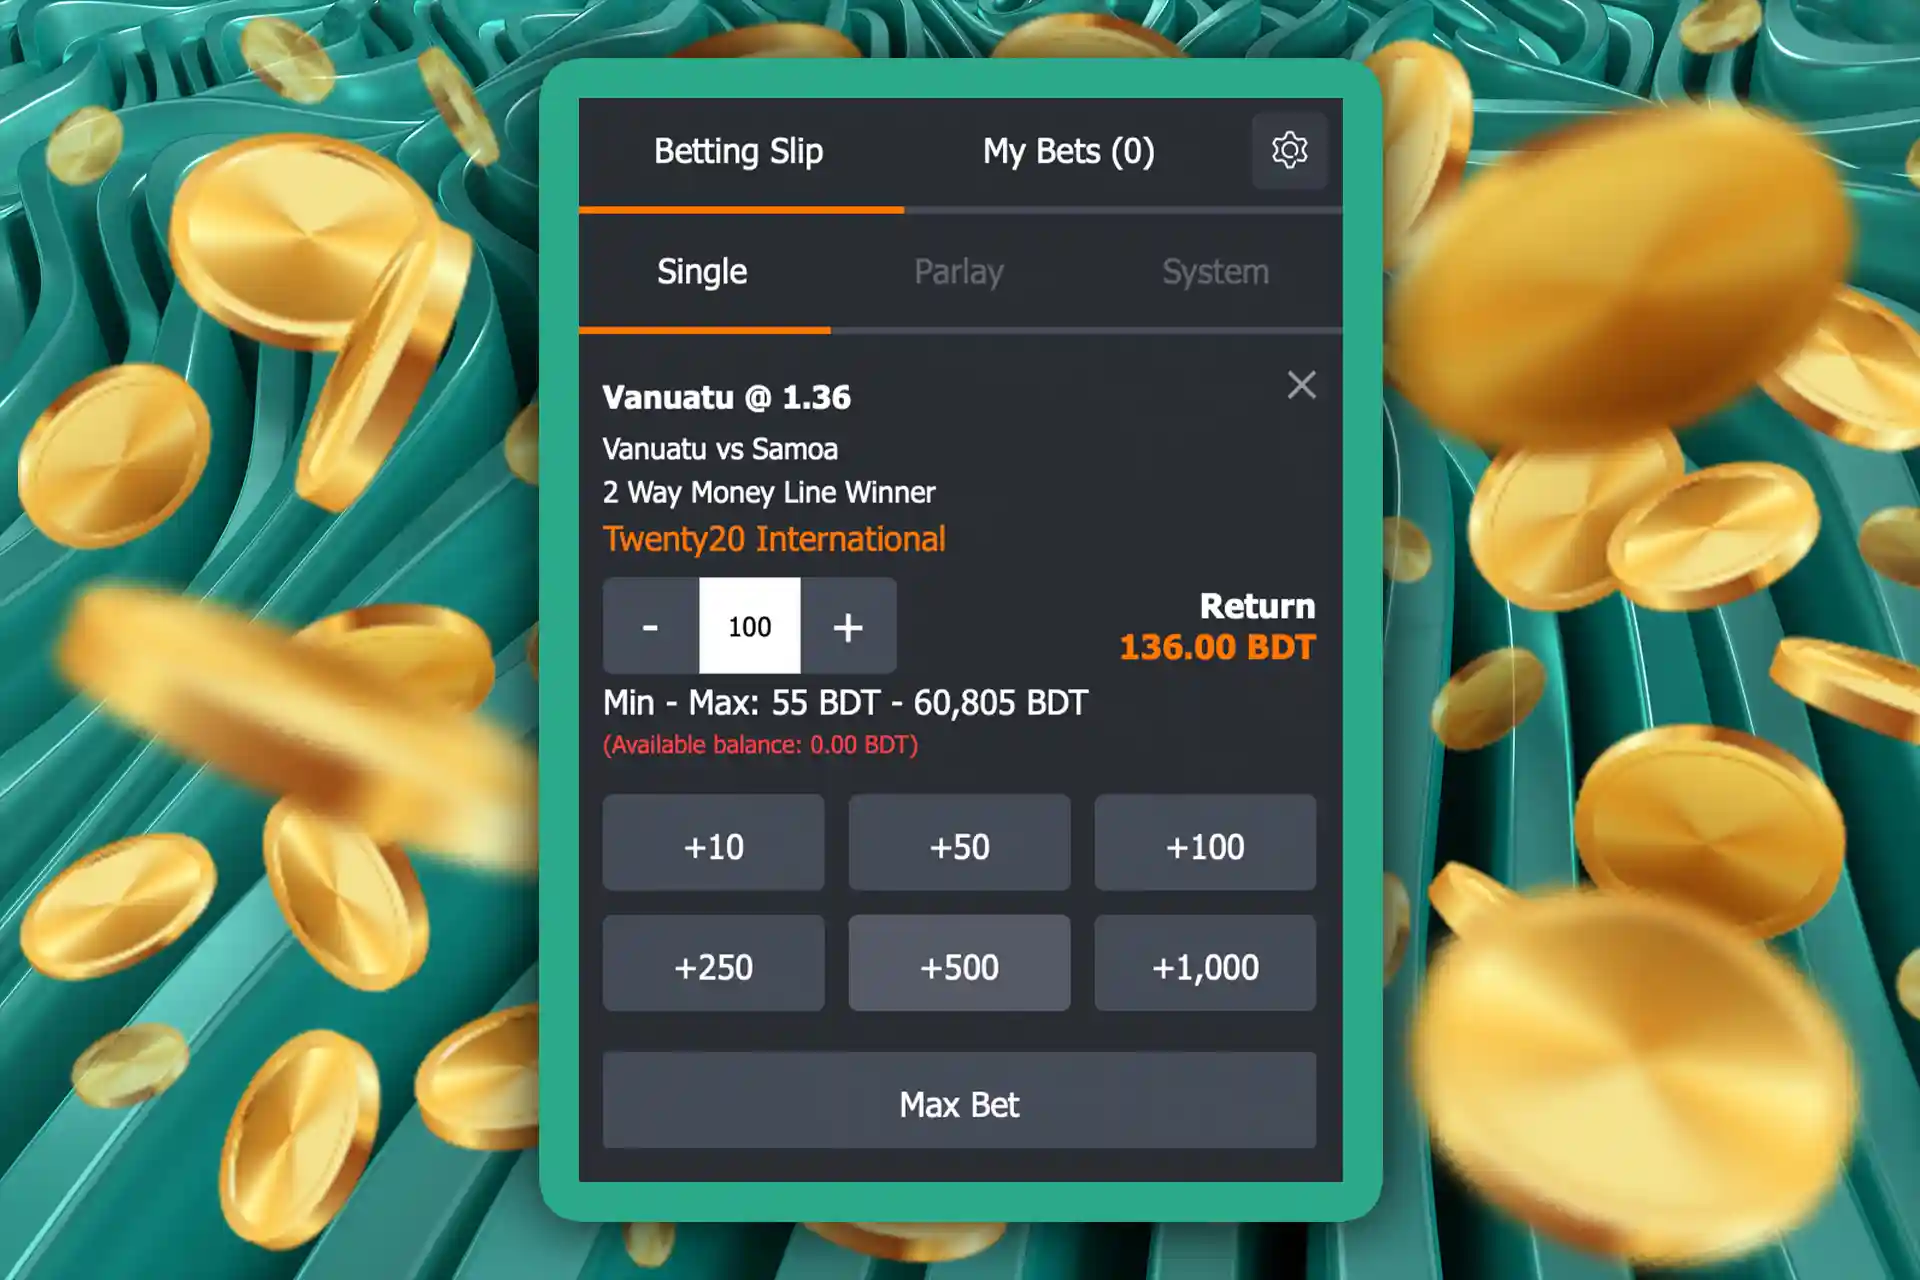 New bettors find it easier to place single bets.